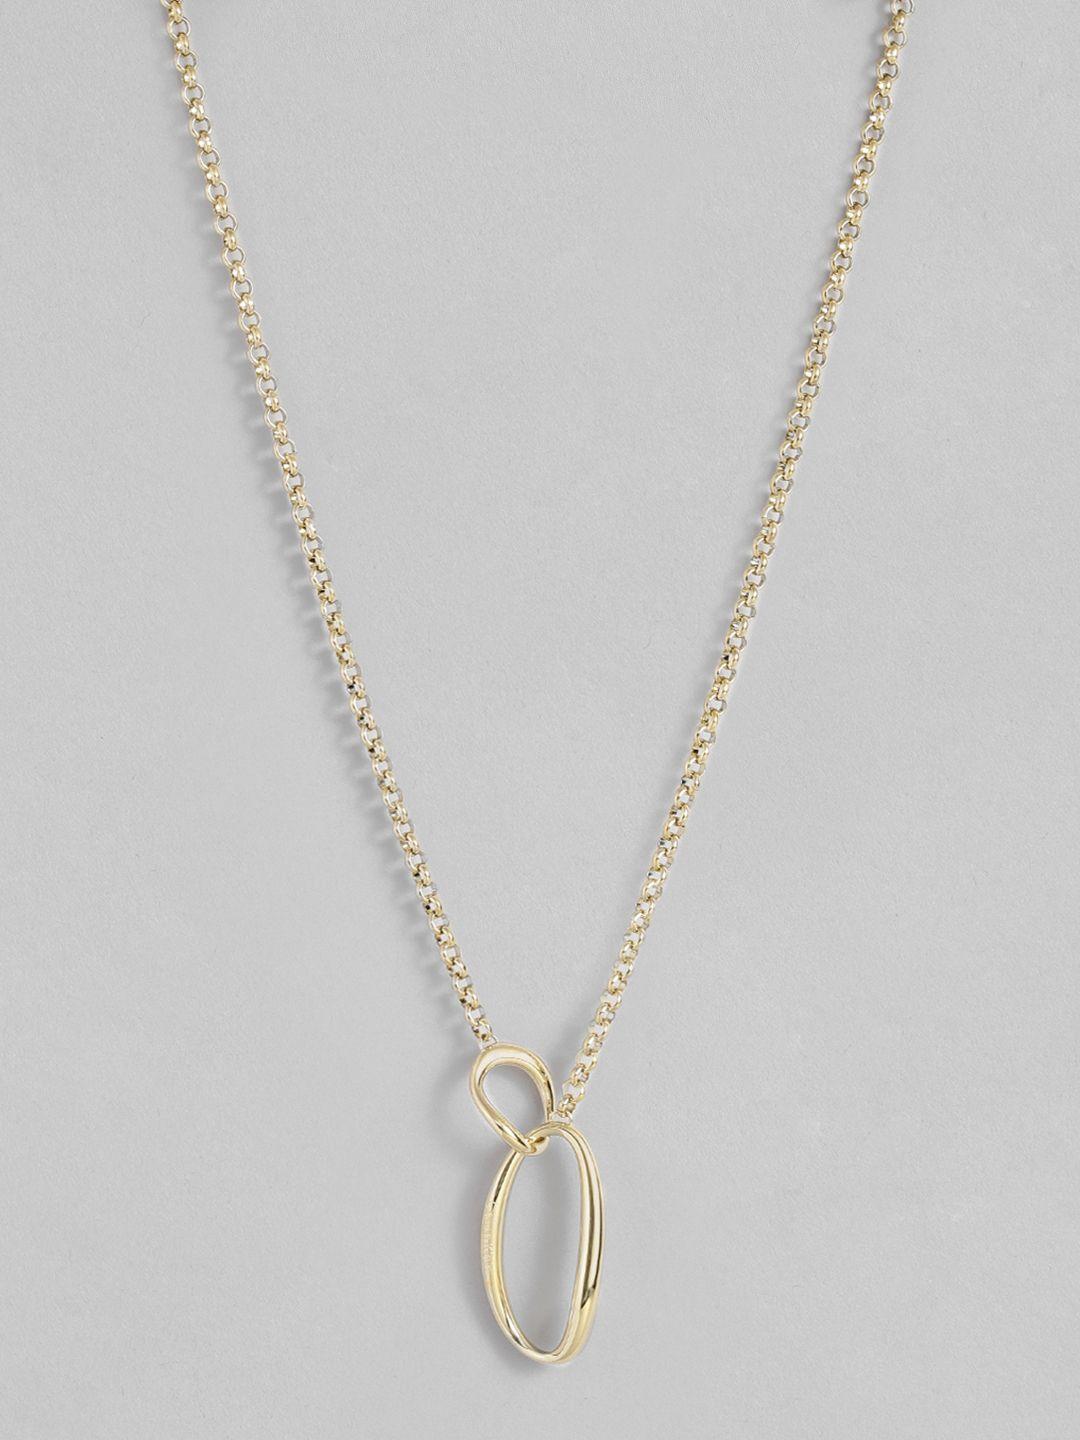 calvin-klein-playful-organic-shapes-necklace